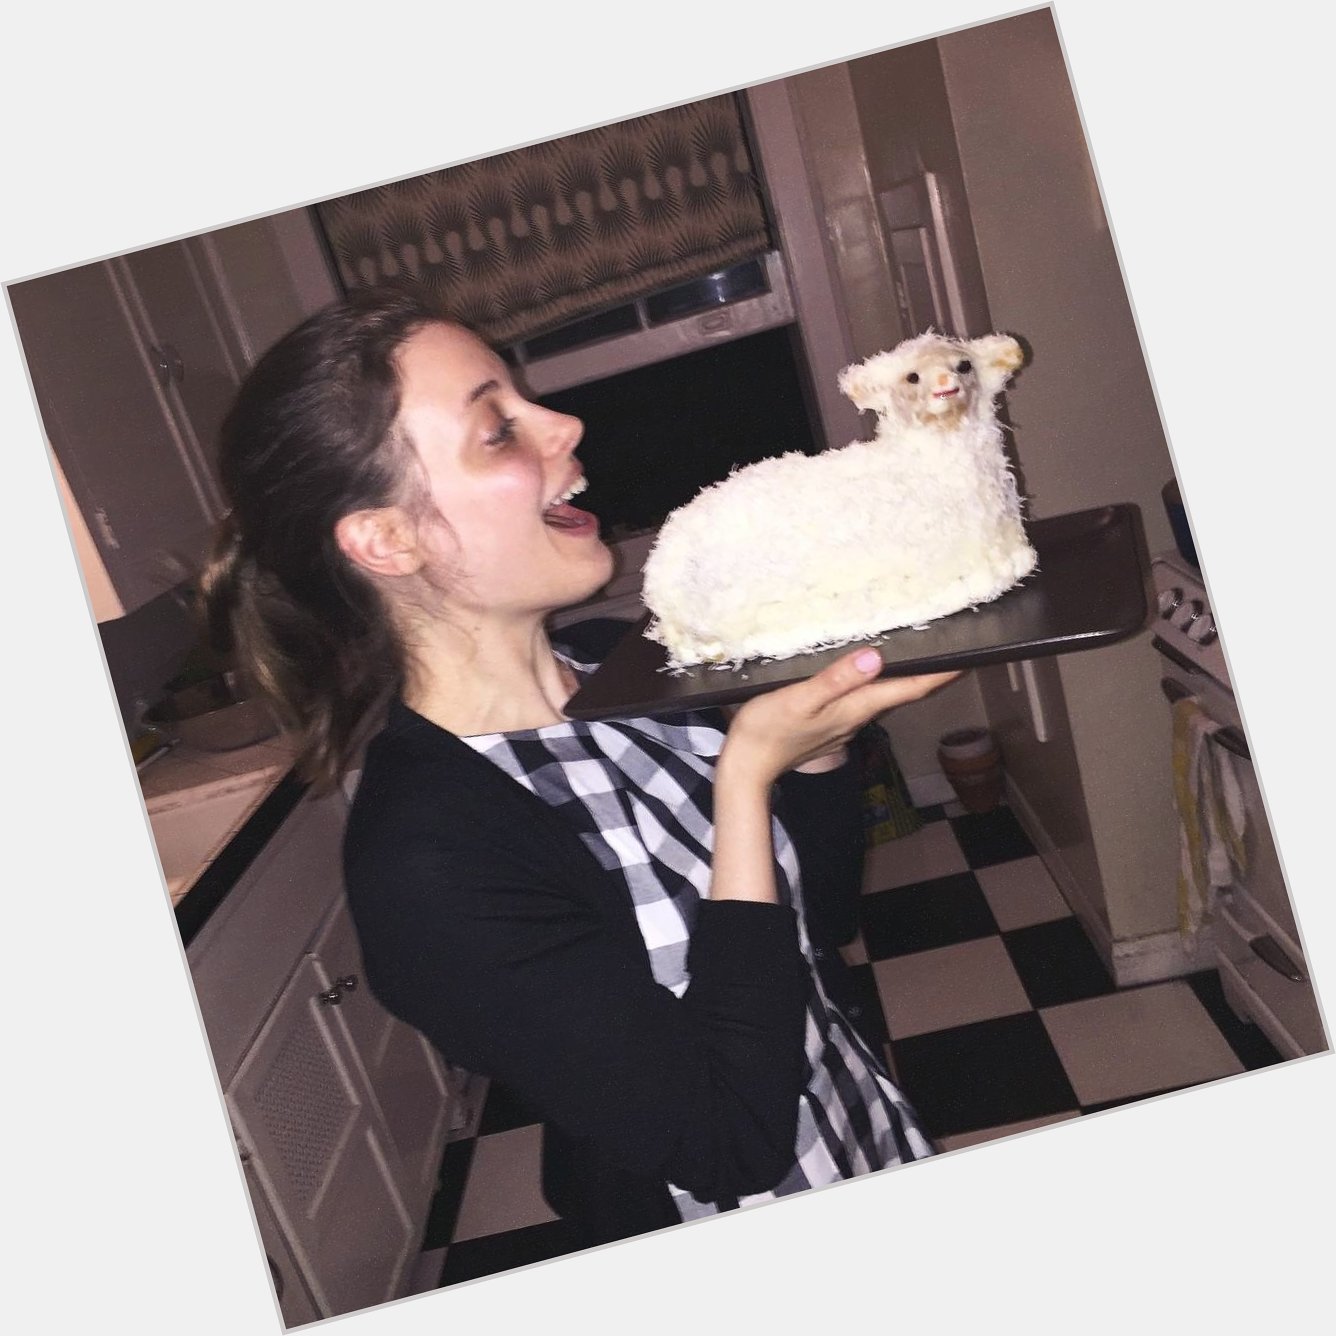 Gillian jacobs with a cake to celebrate her 39th birthday everyone say happy birthday gillian jacobs 